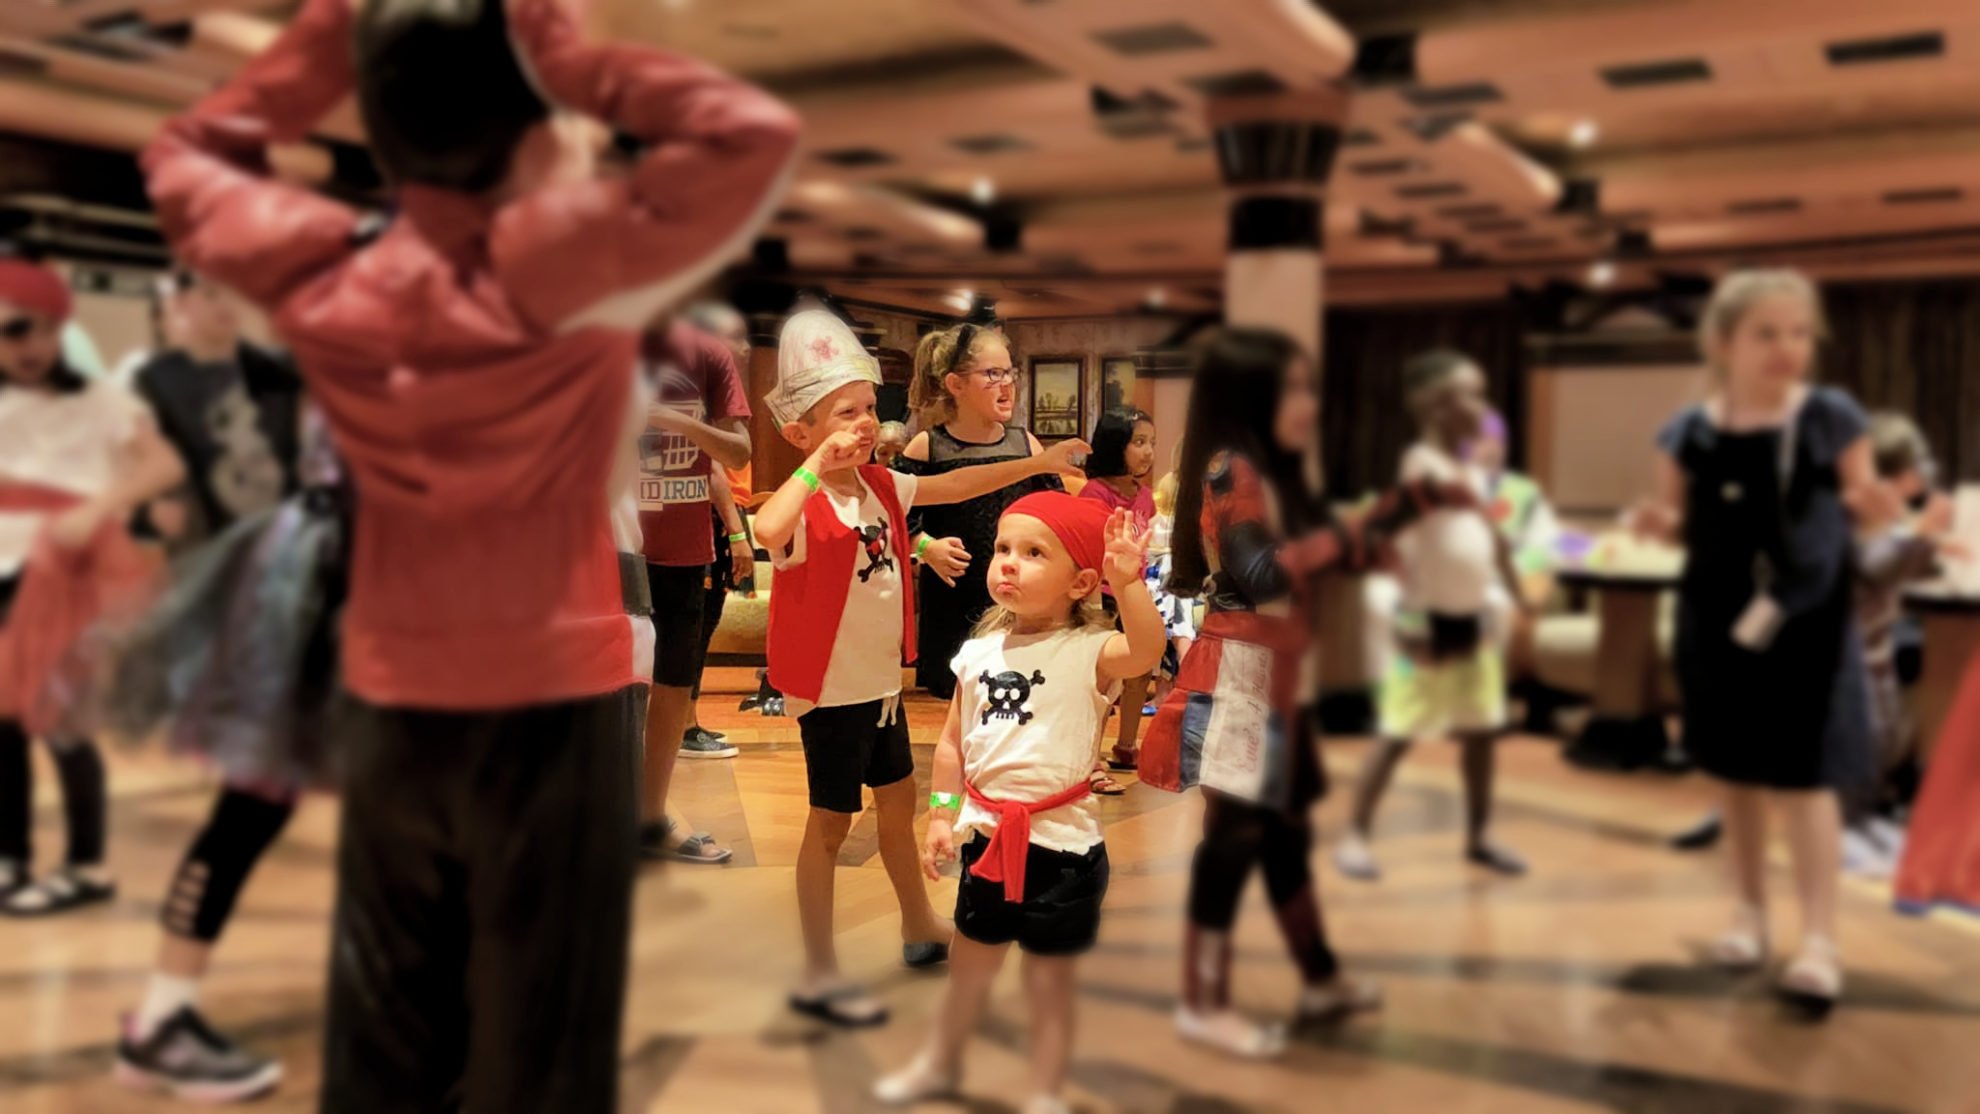 Little girl dressed as a pirate on a dance floor.